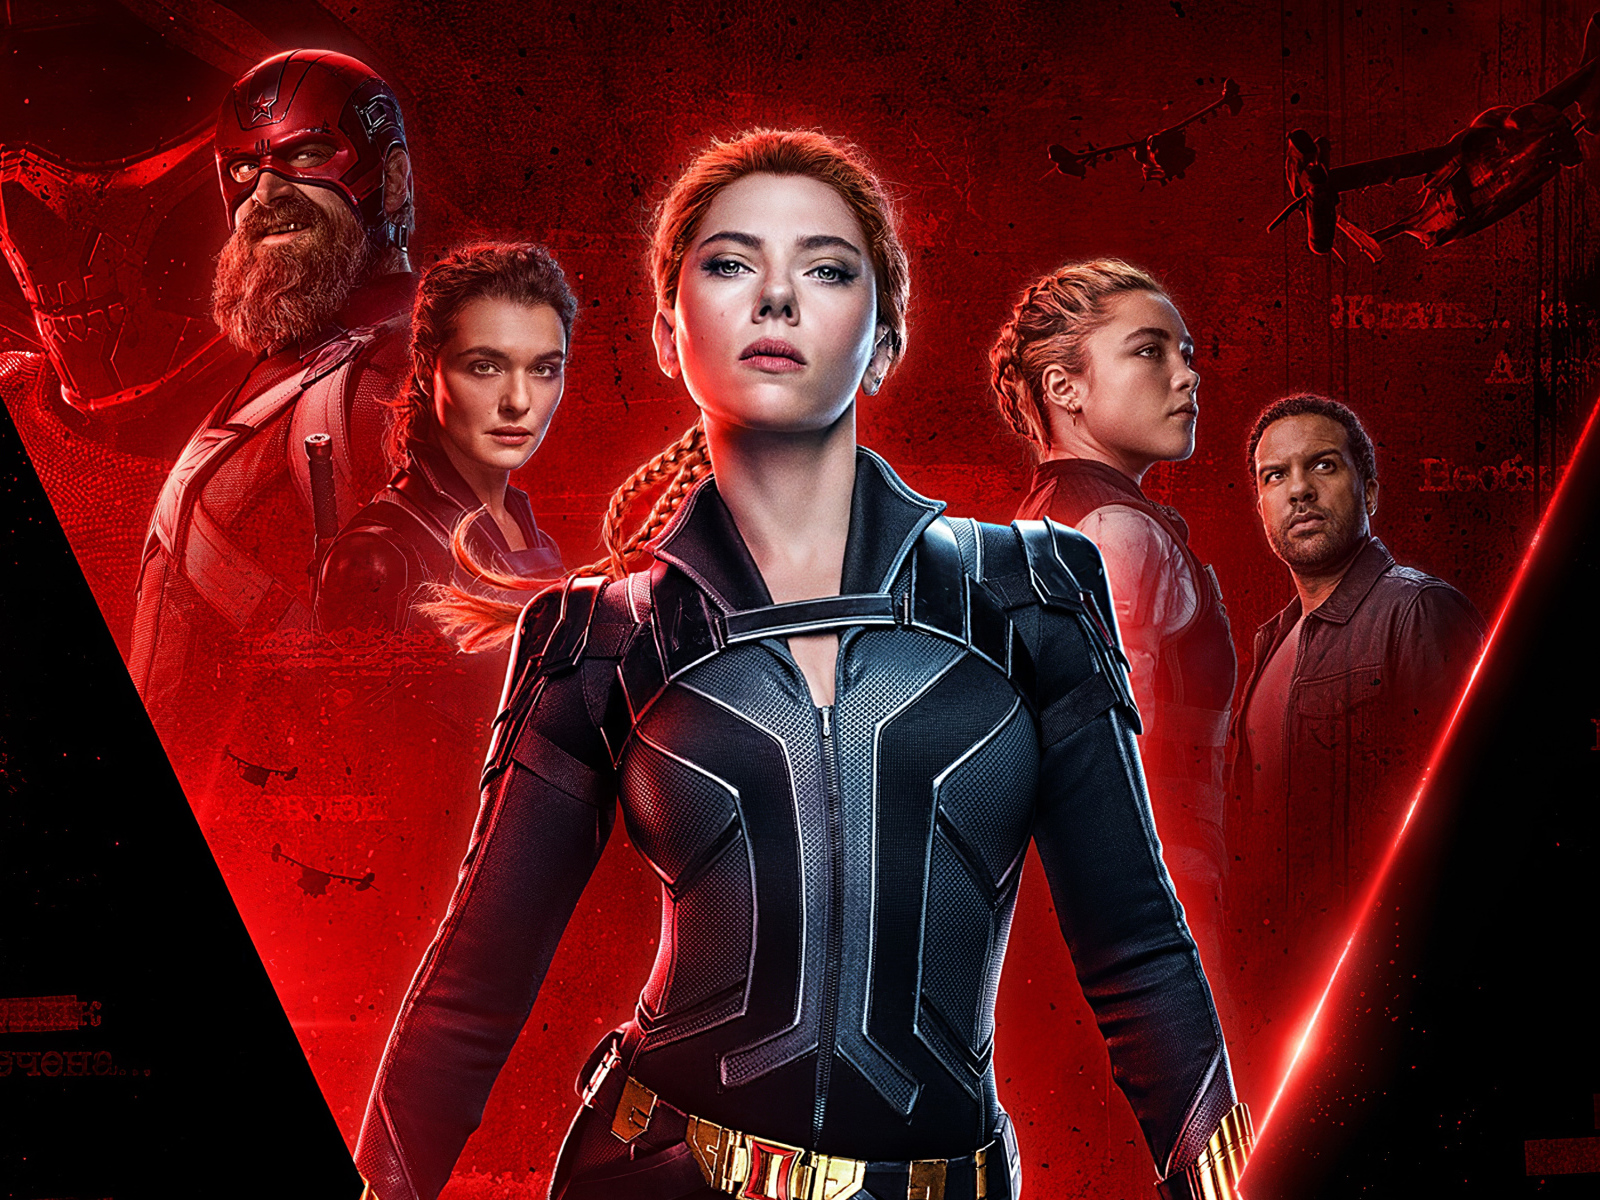 Poster with the characters of the movie Black Widow, 2020